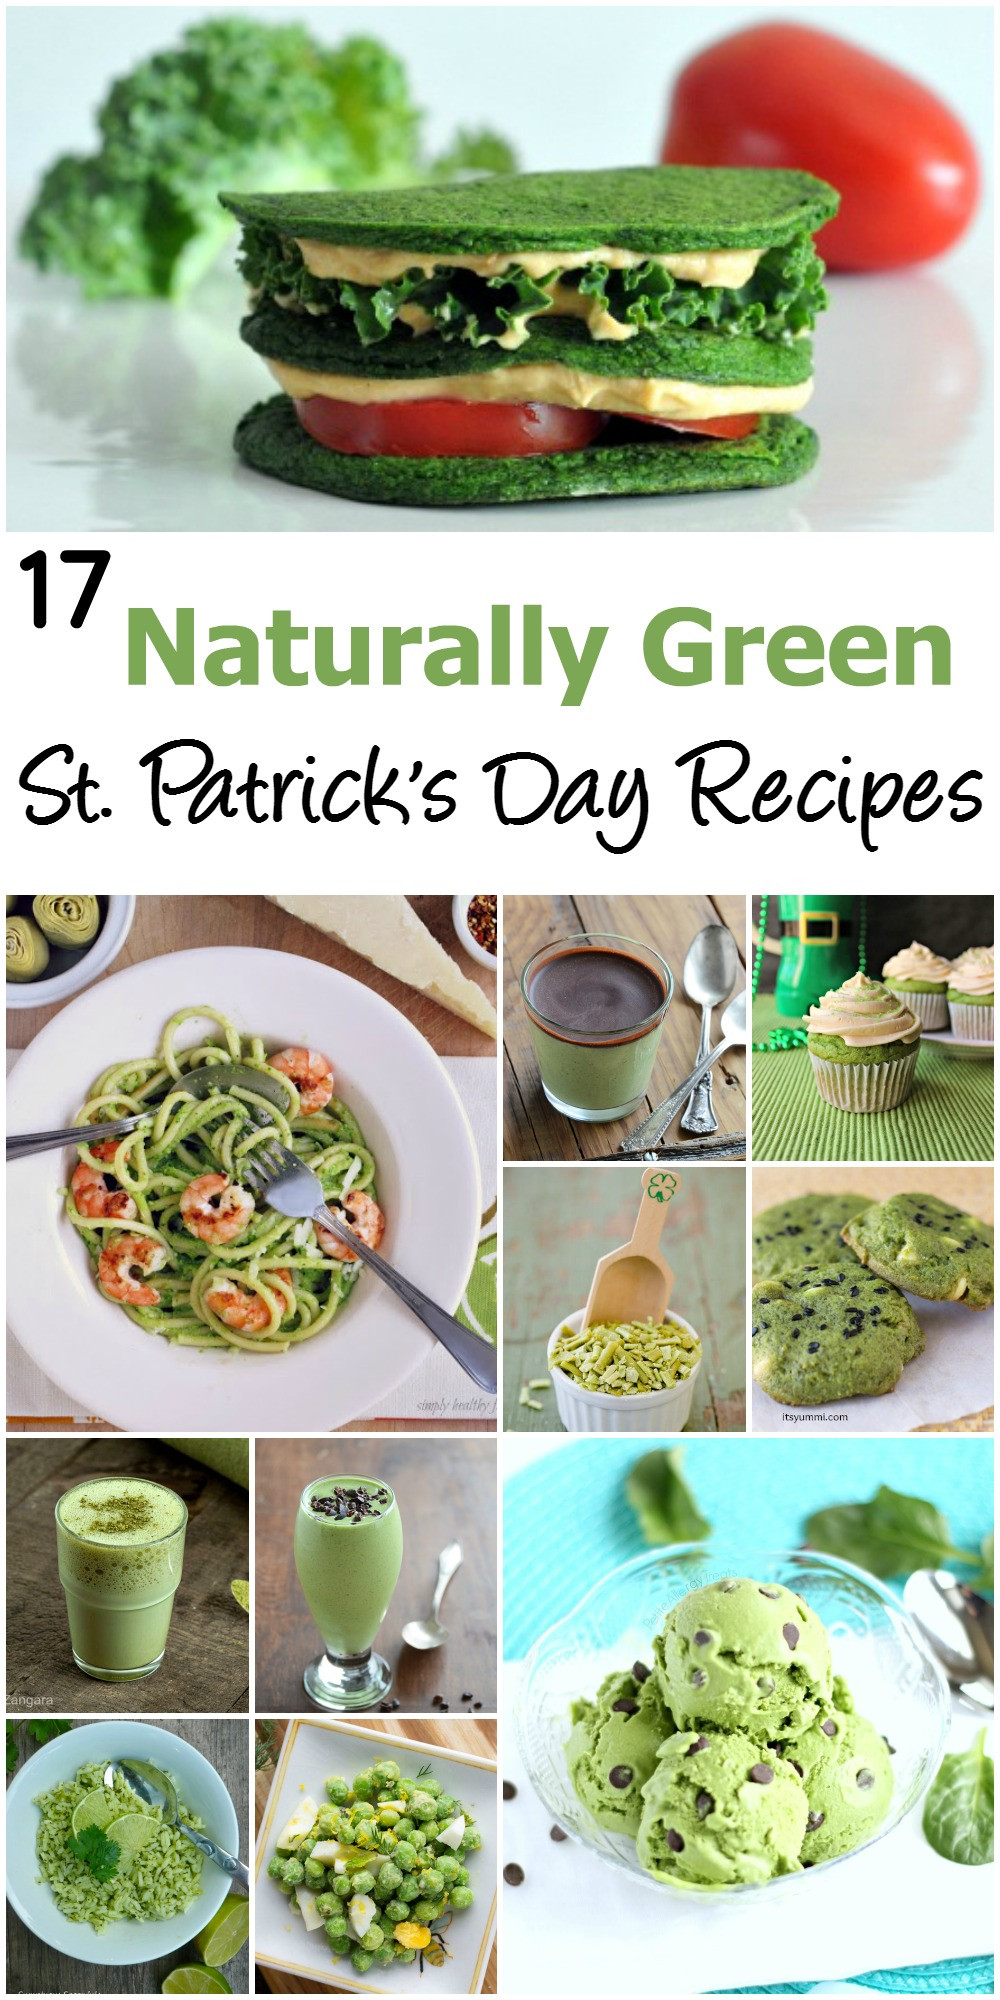 Food For St Patrick's Day Party
 Naturally Green Recipes for St Patrick s Day 17 for the